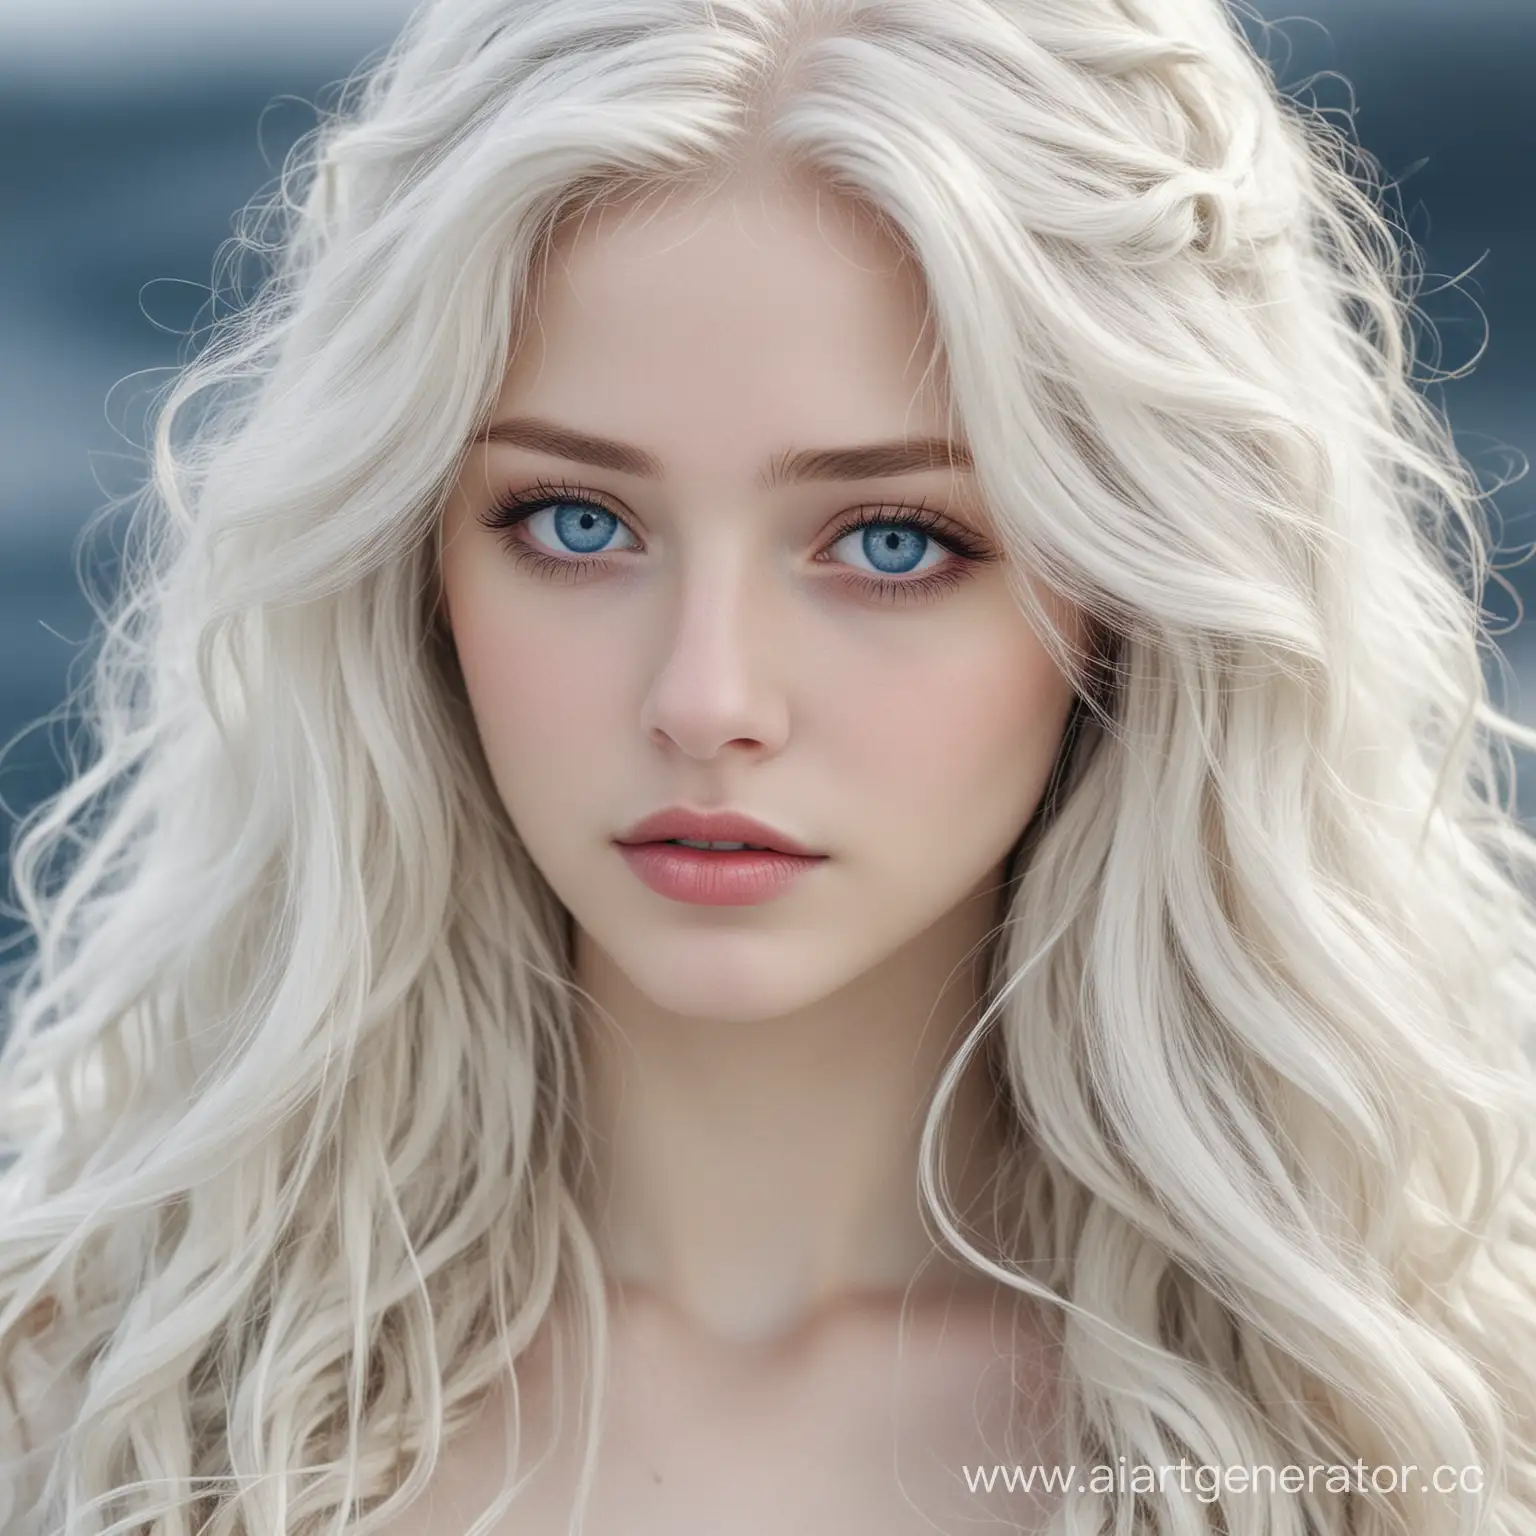 Cold-Princess-with-Long-Wavy-White-Hair-in-a-Severe-Northern-Realm